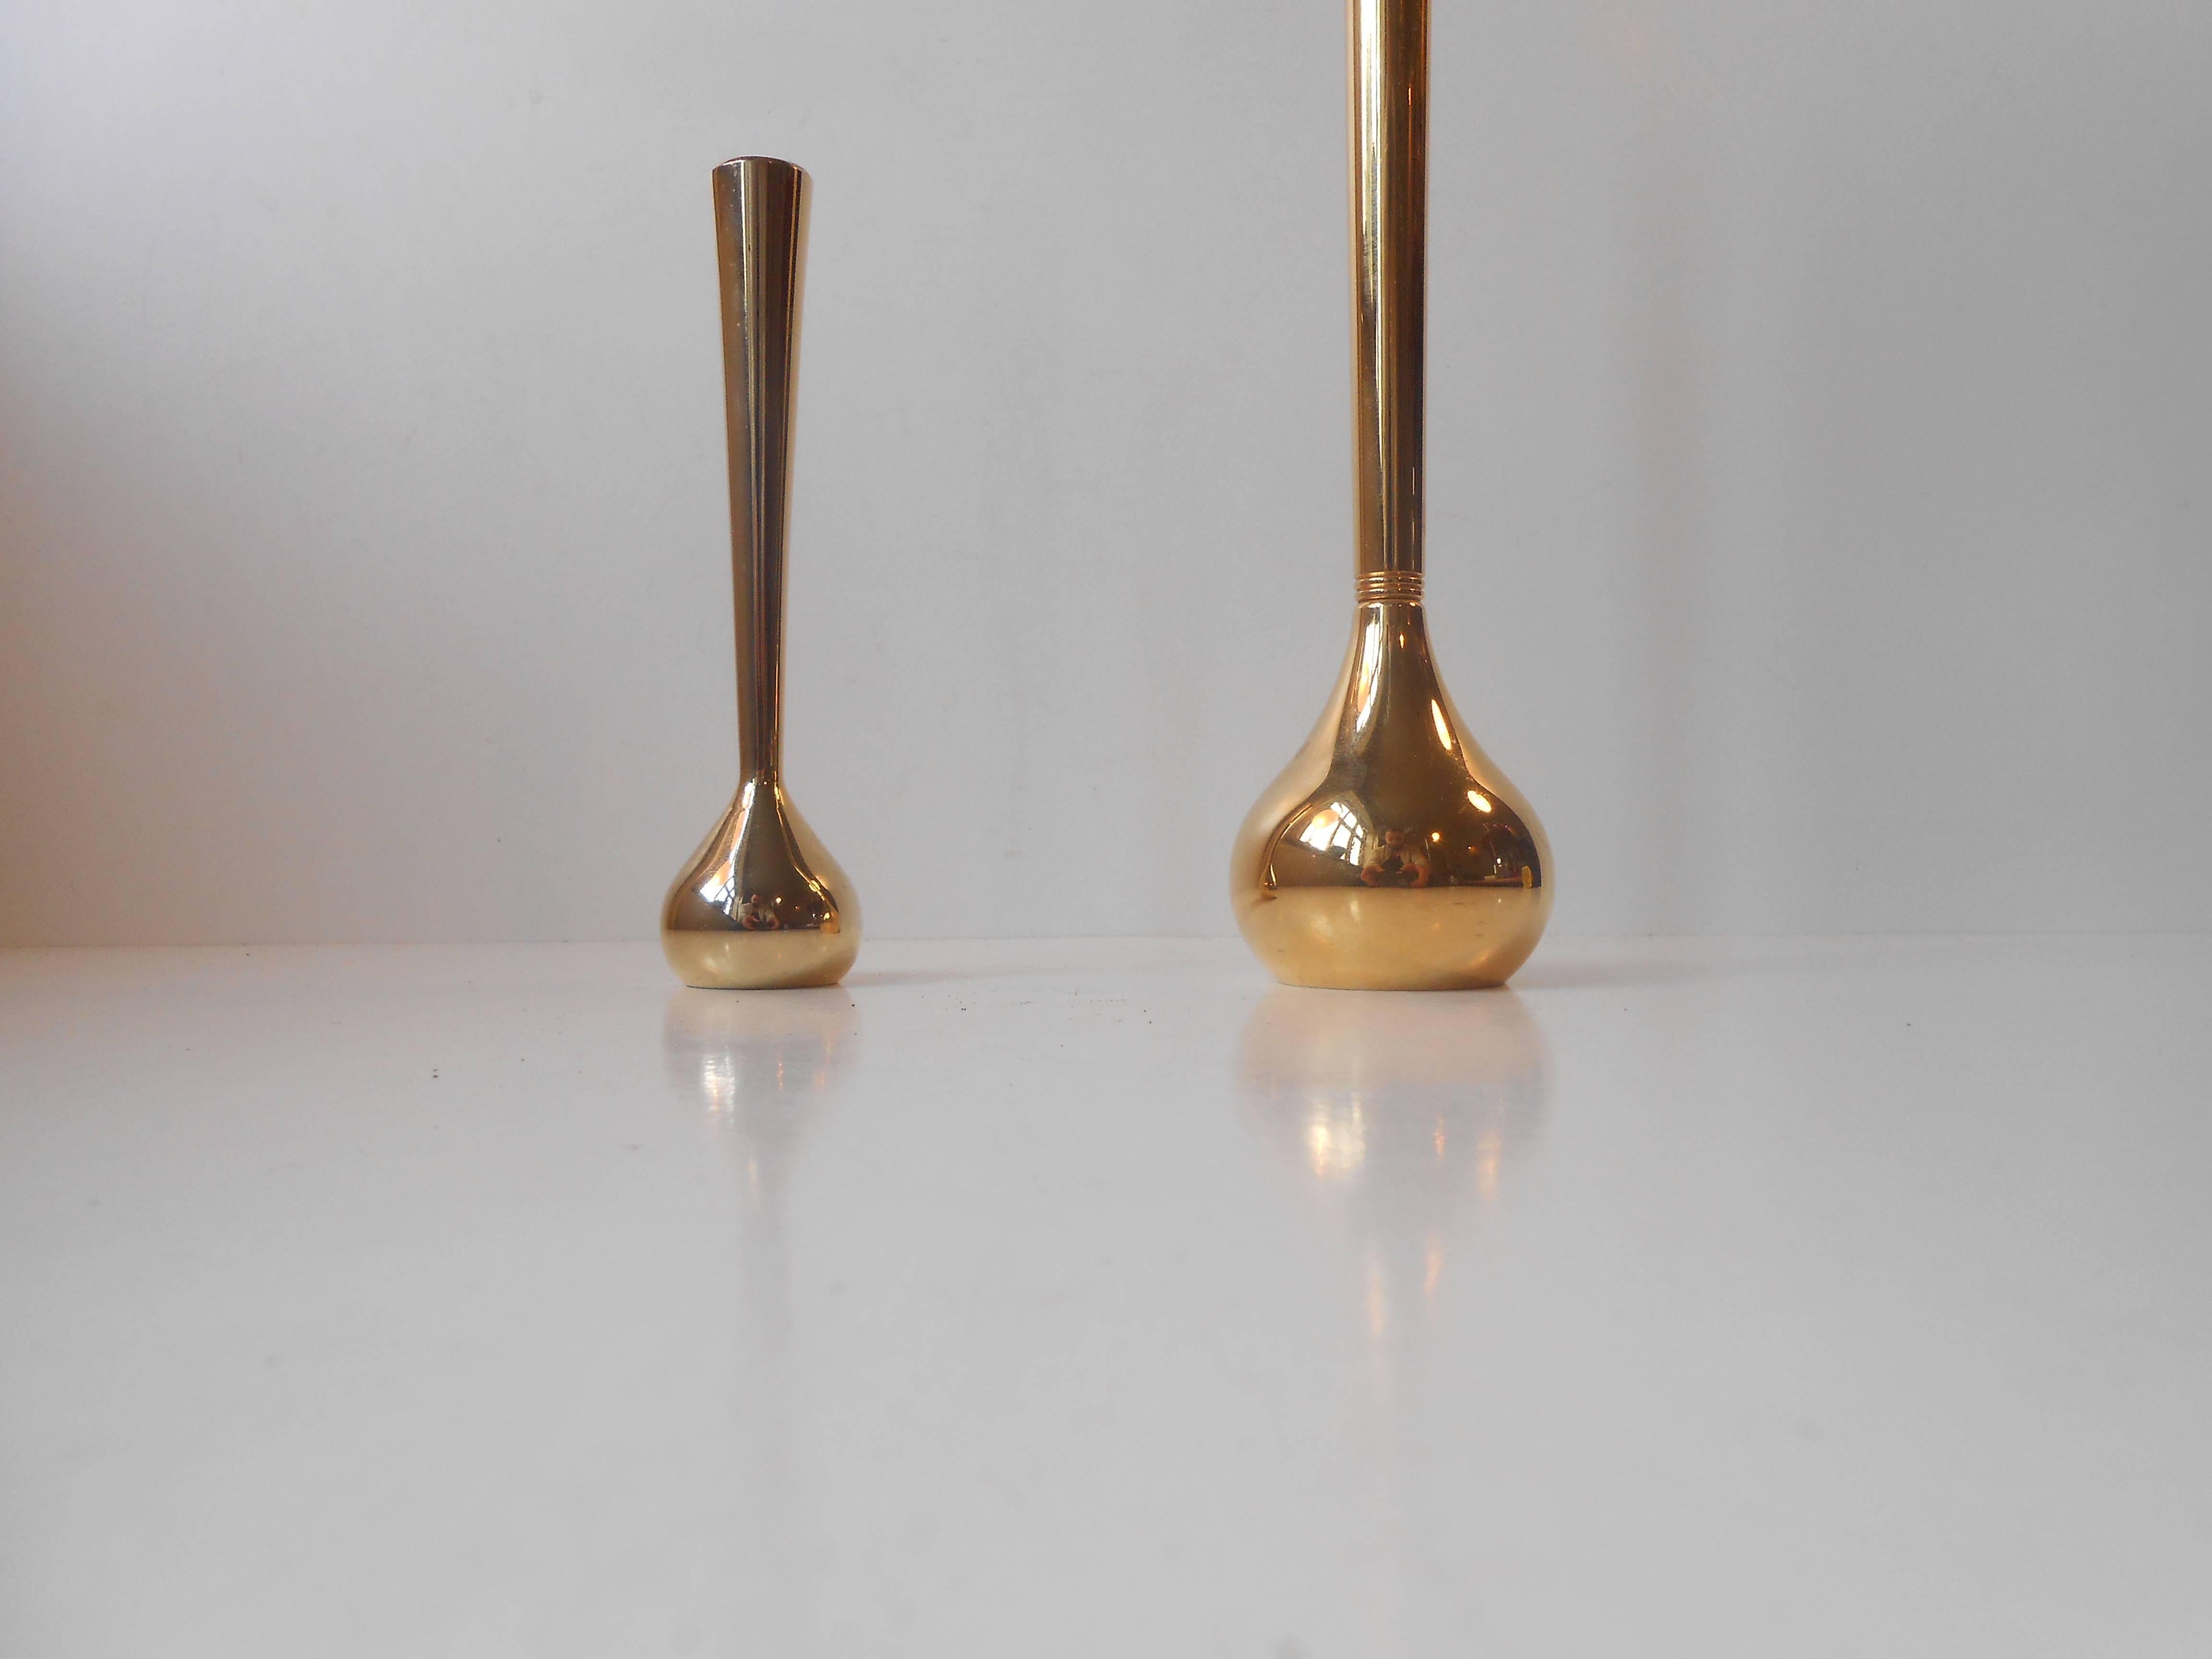 A series of heavily gilded Mid-Century Modern candlesticks and vases was designed by Hugo Asmussen in the early 1960s. Stamped to the bottom of each vase: Design Asmussen, 24-carat gold plating, made in Denmark. Measurements: H: 5.8/10.5 inches